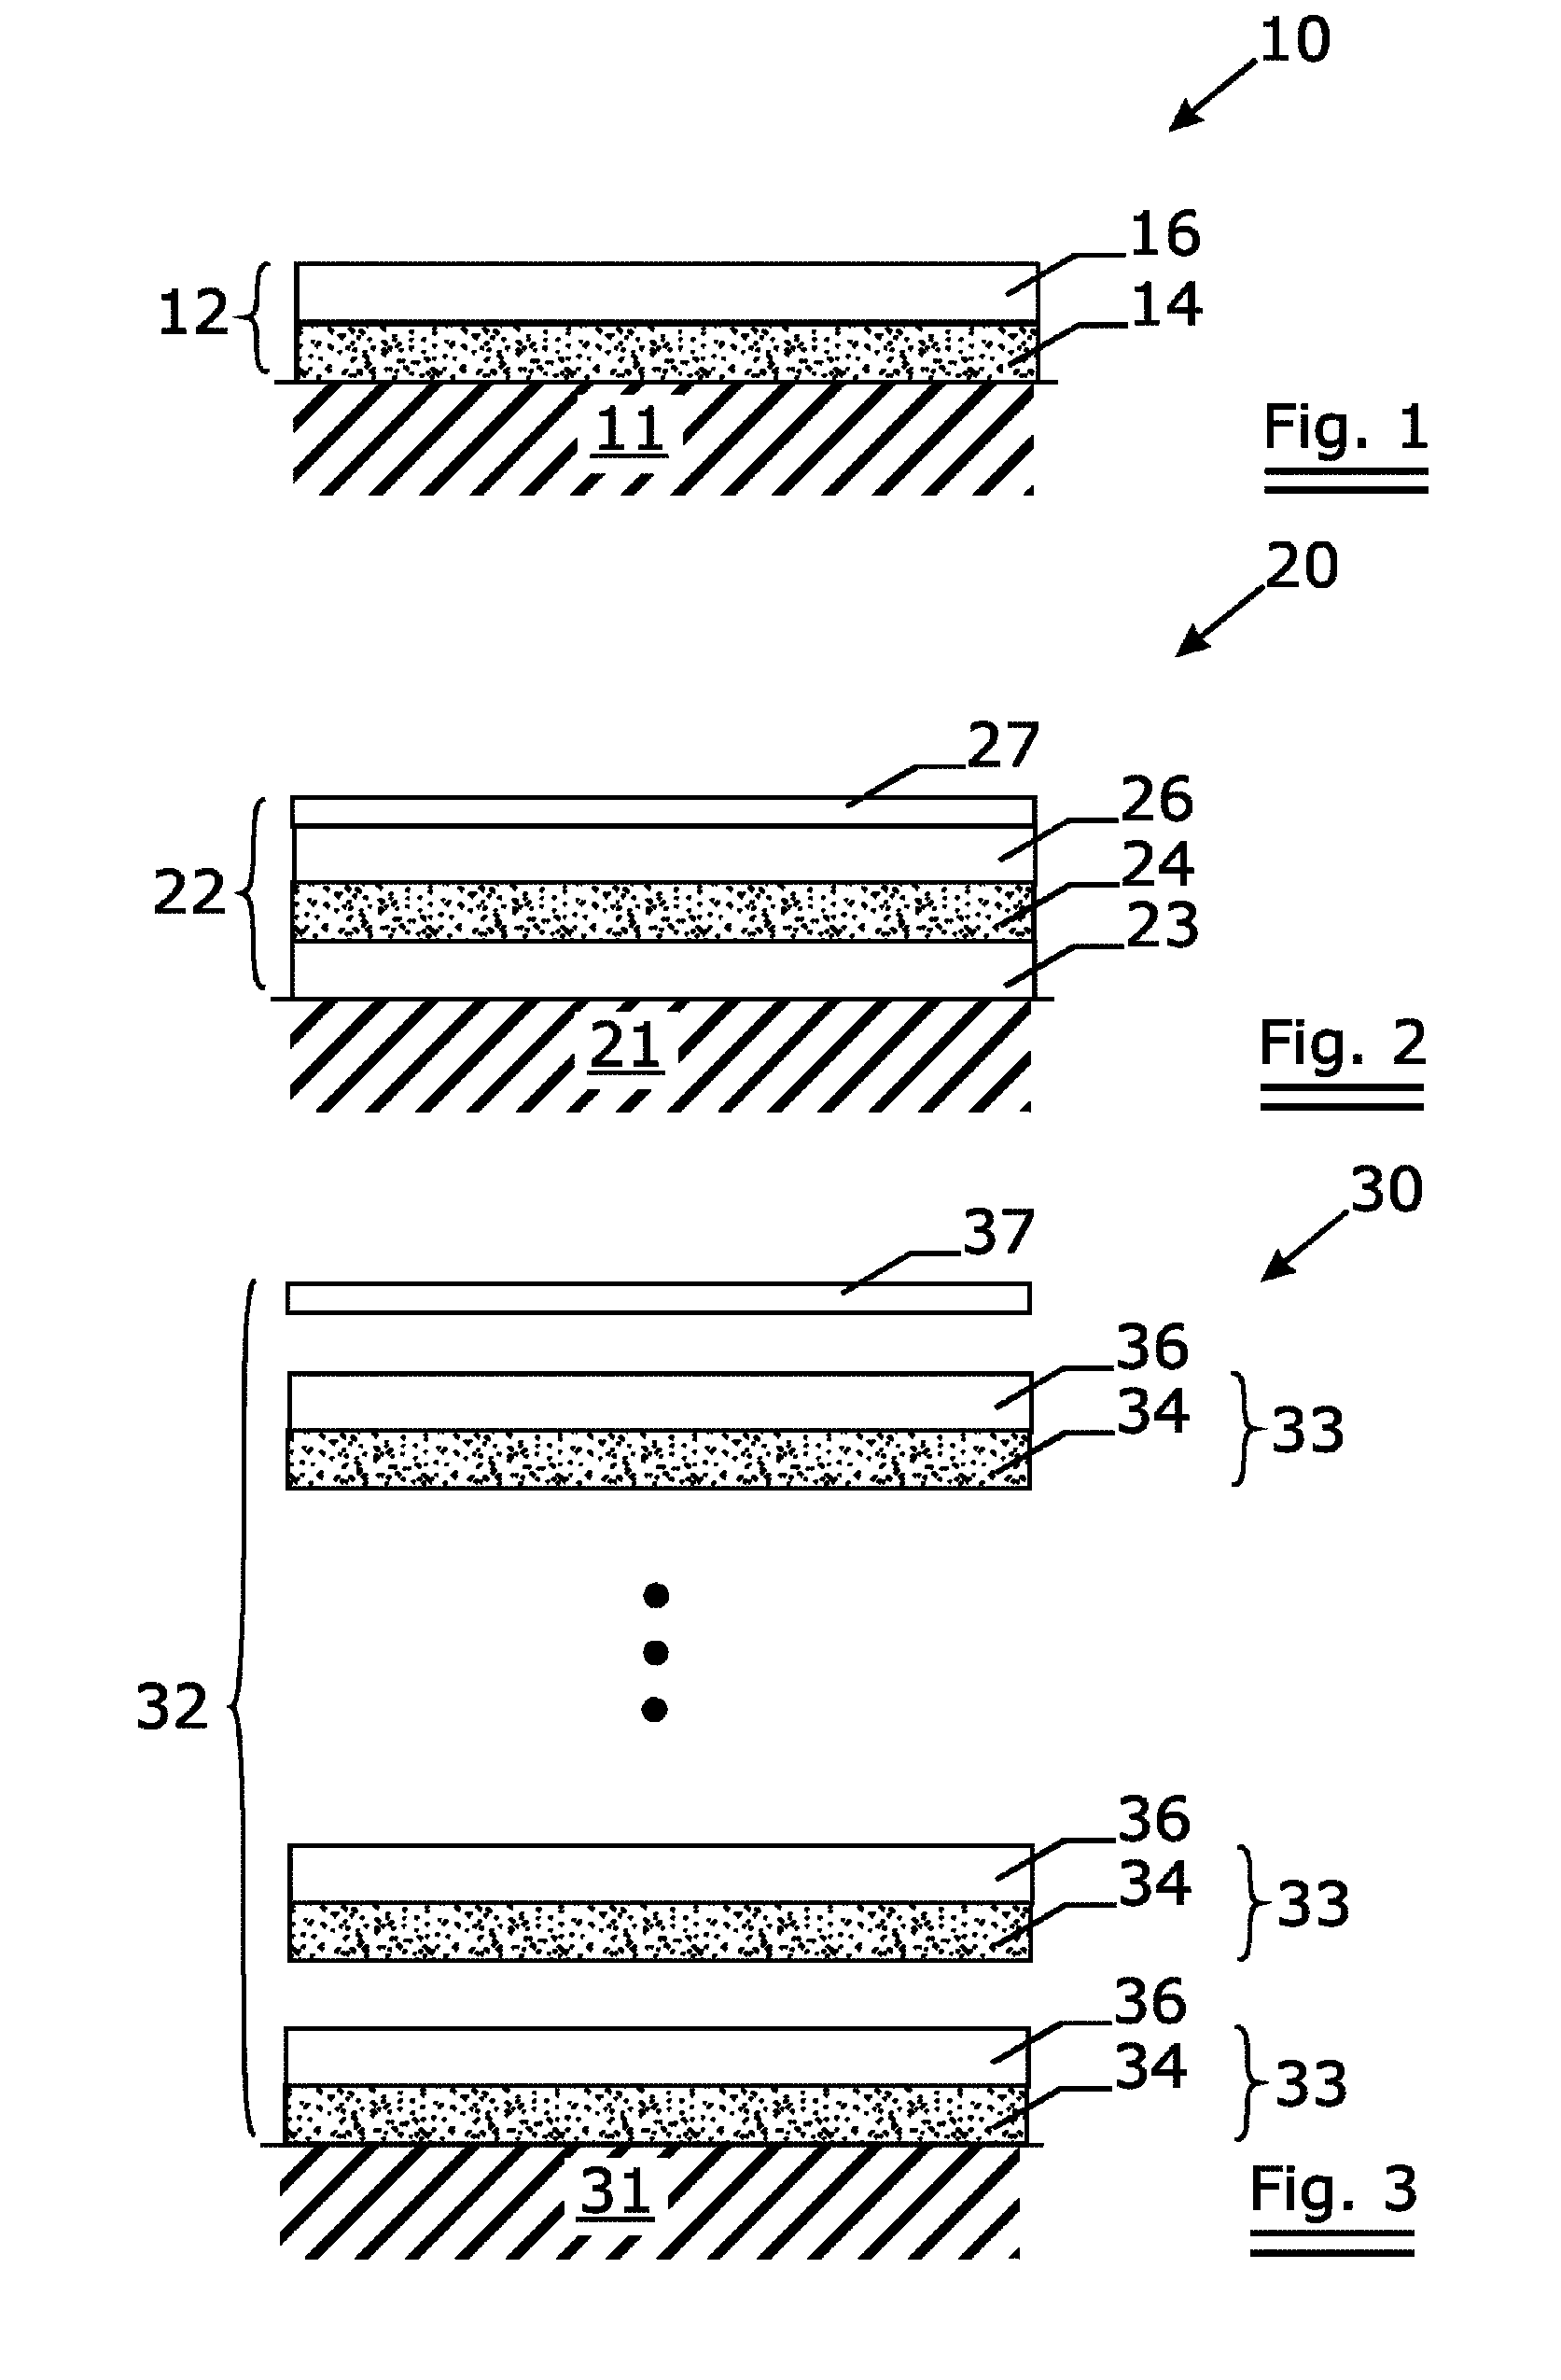 Substrate coated with a layered structure comprising a tetrahedral carbon layer and a softer outer layer